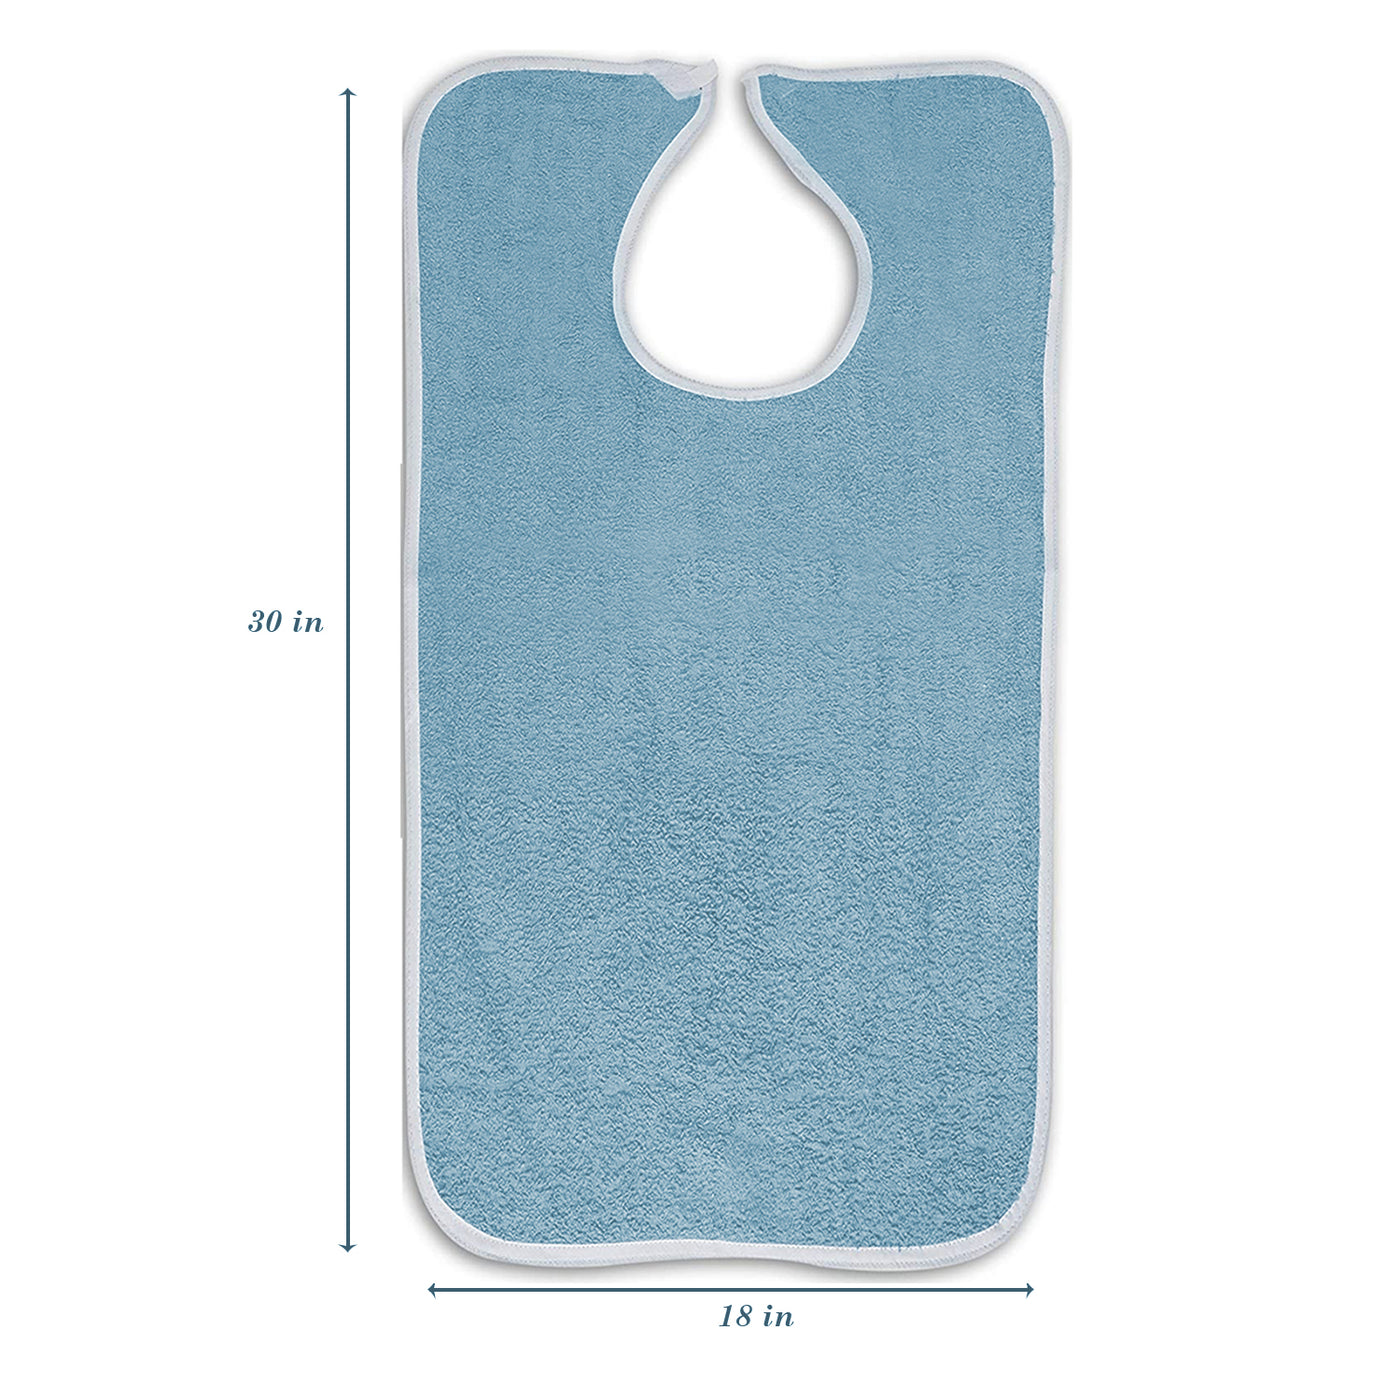 Terry Adult Bibs with Velcro Closure (Royal) - Noble's Health Care Products Solutions